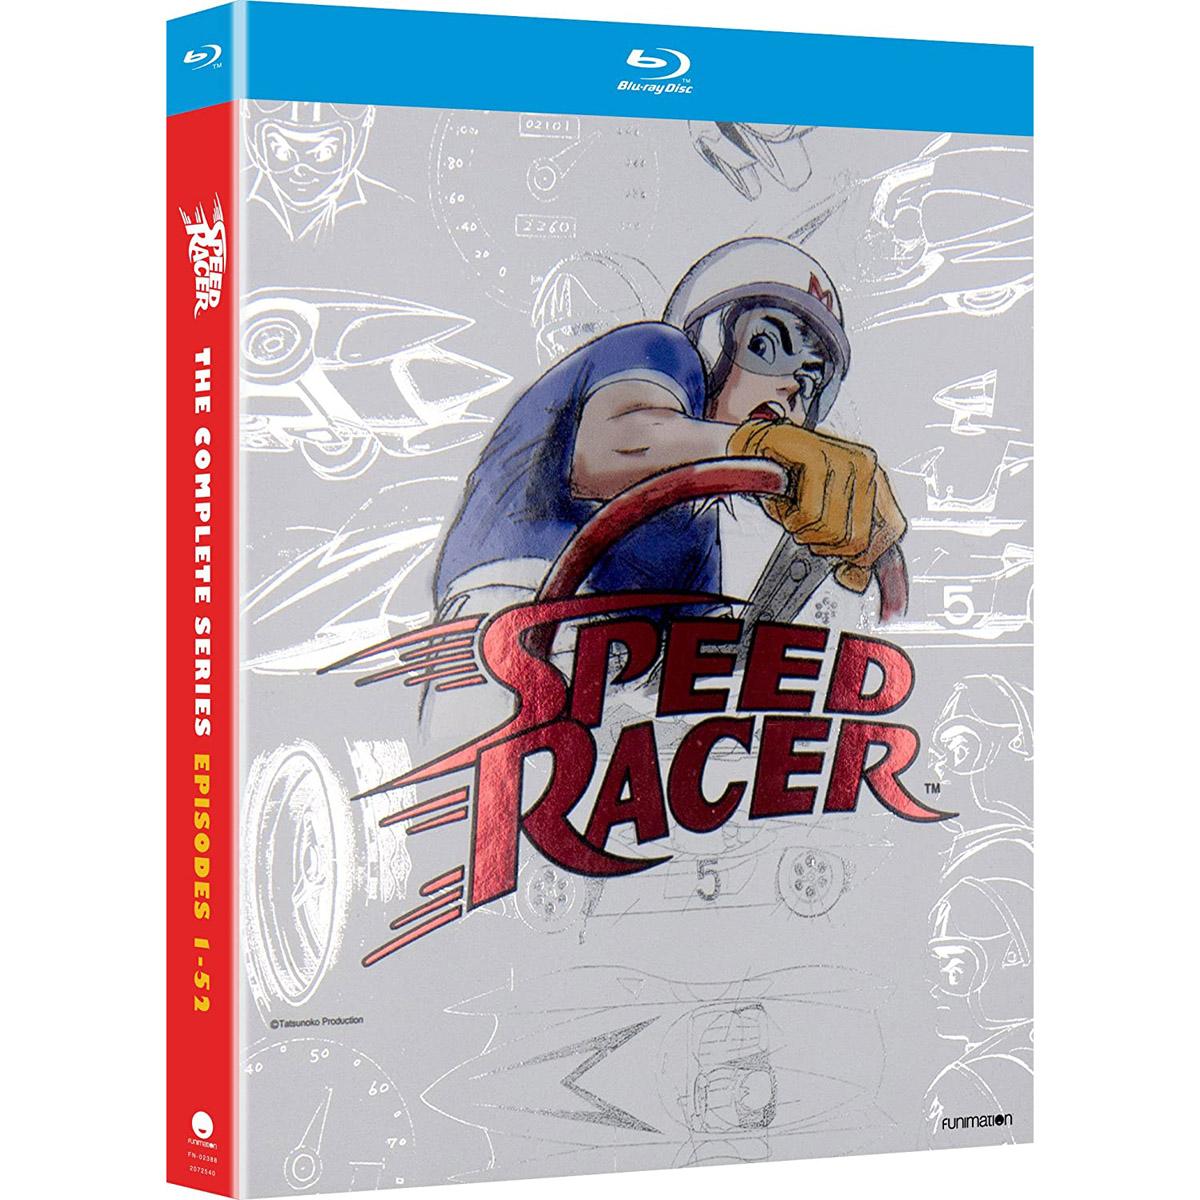 Speed Racer The Complete Series Blu-ray for $12.99